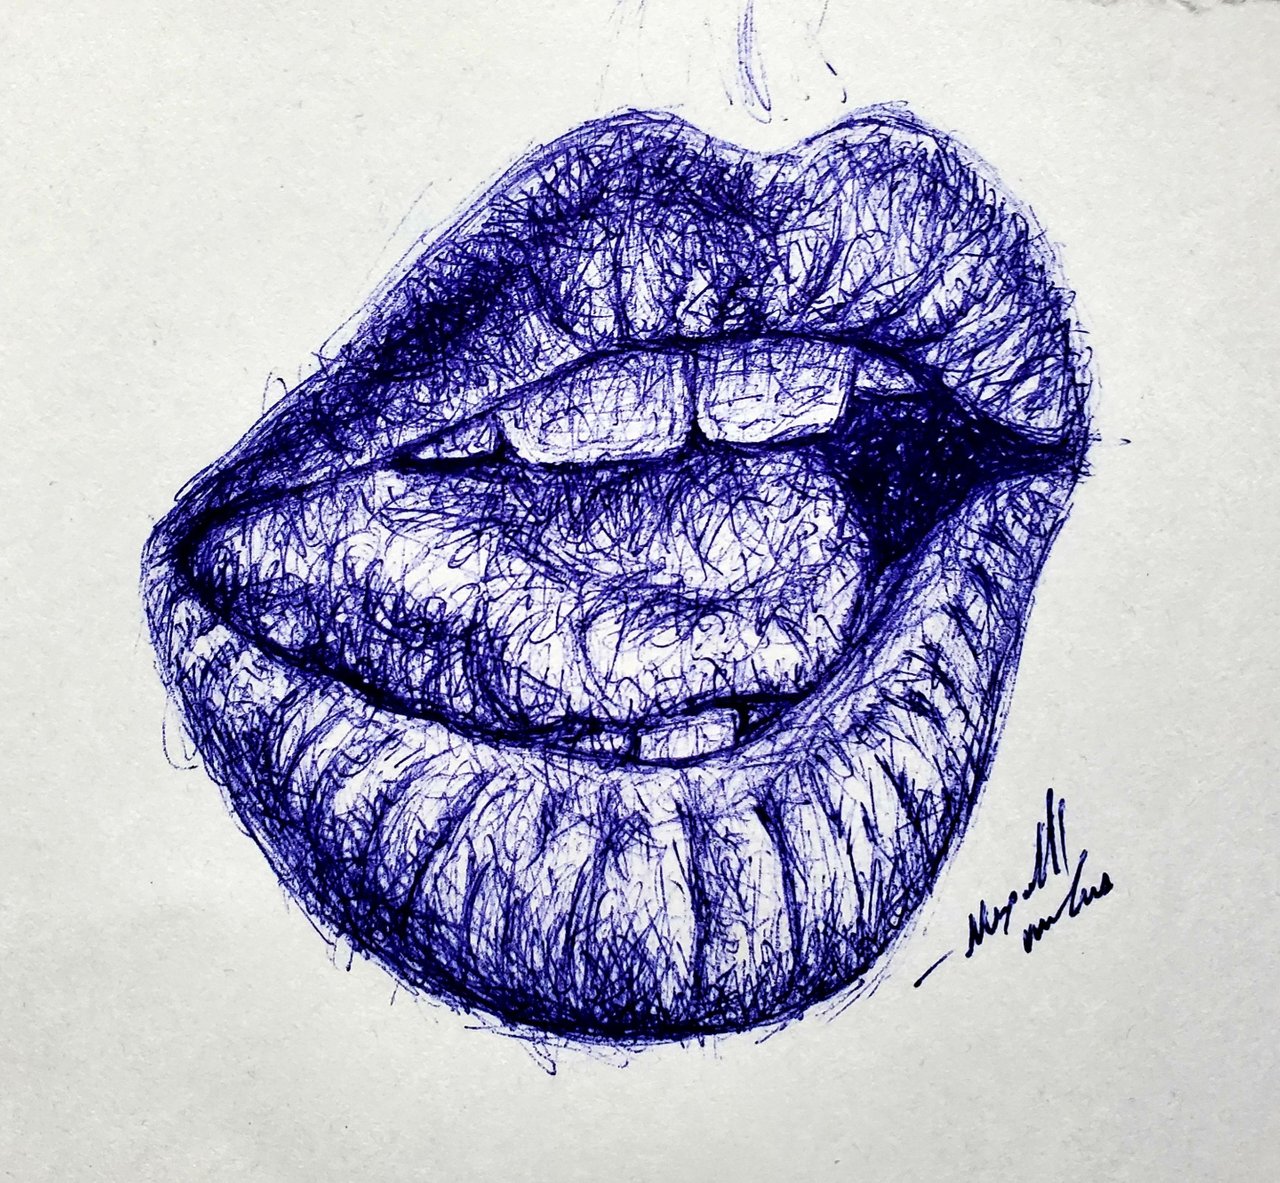 How To Draw Lips: A Step-by-Step Tutorial – Artlex